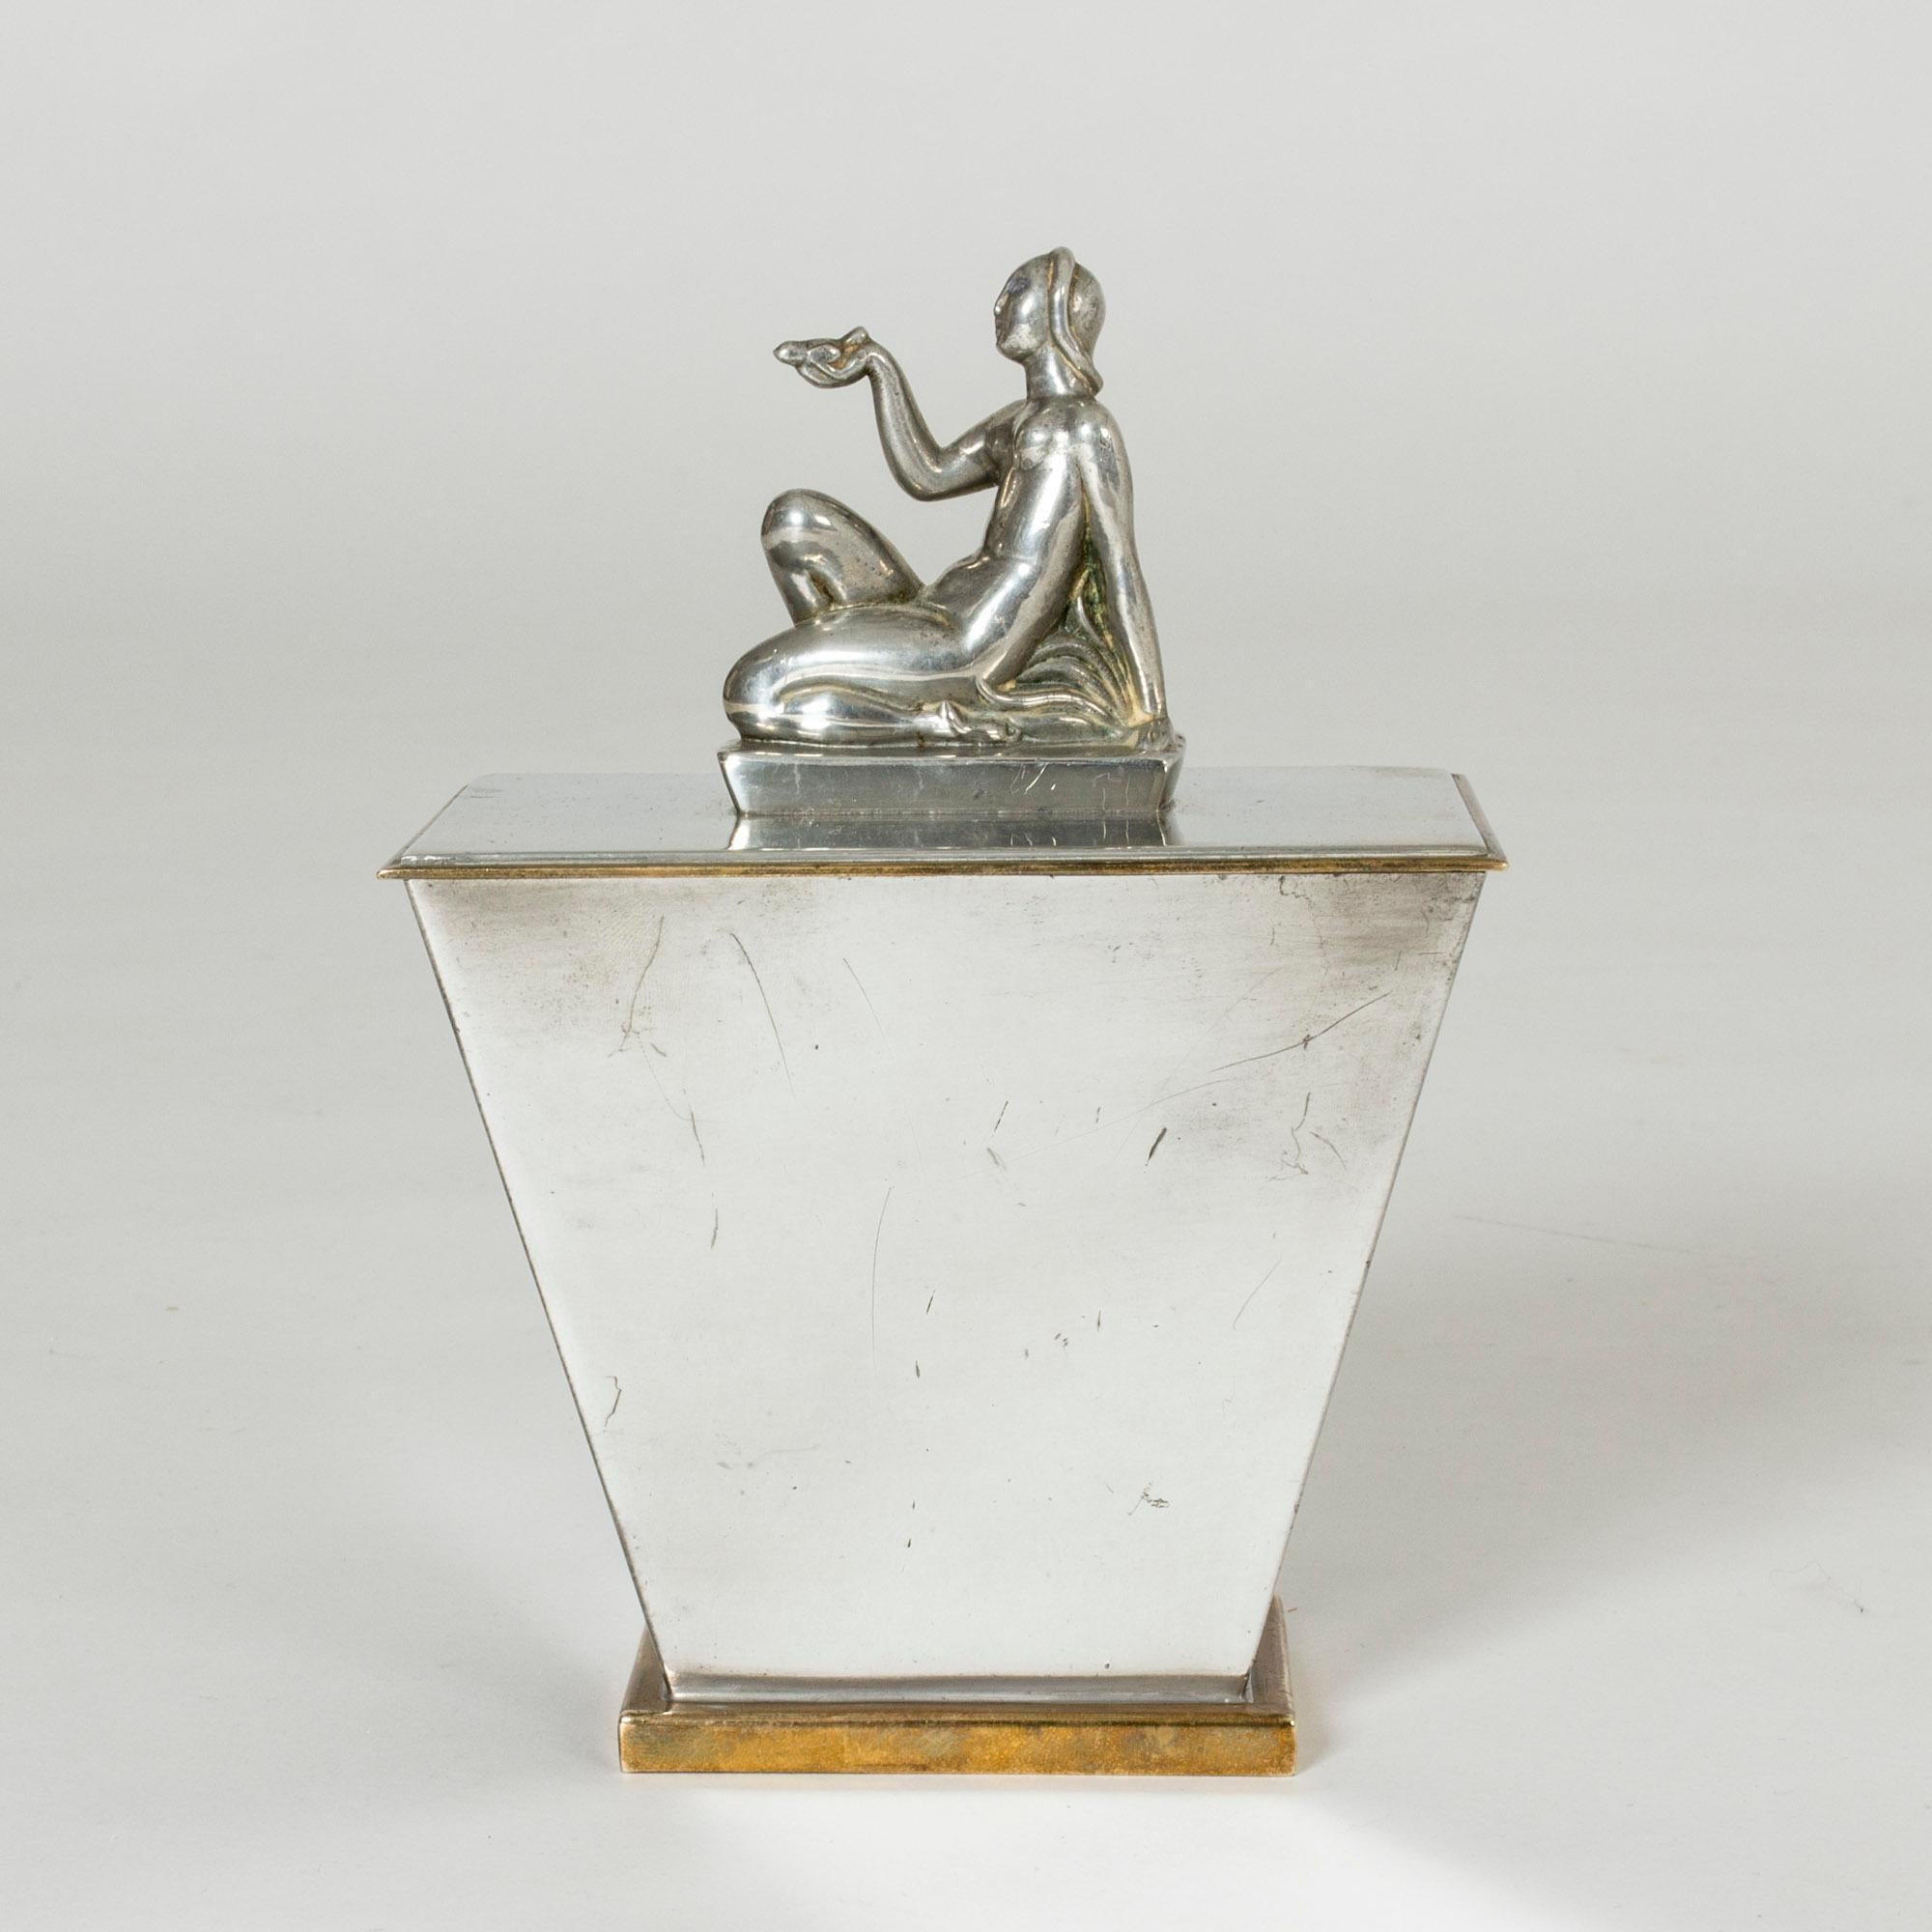 Striking pewter jar by Oscar Antonsson, with brass at the base and around the edge of the lid. Adorned with a beautifully sculpted kneeling woman.